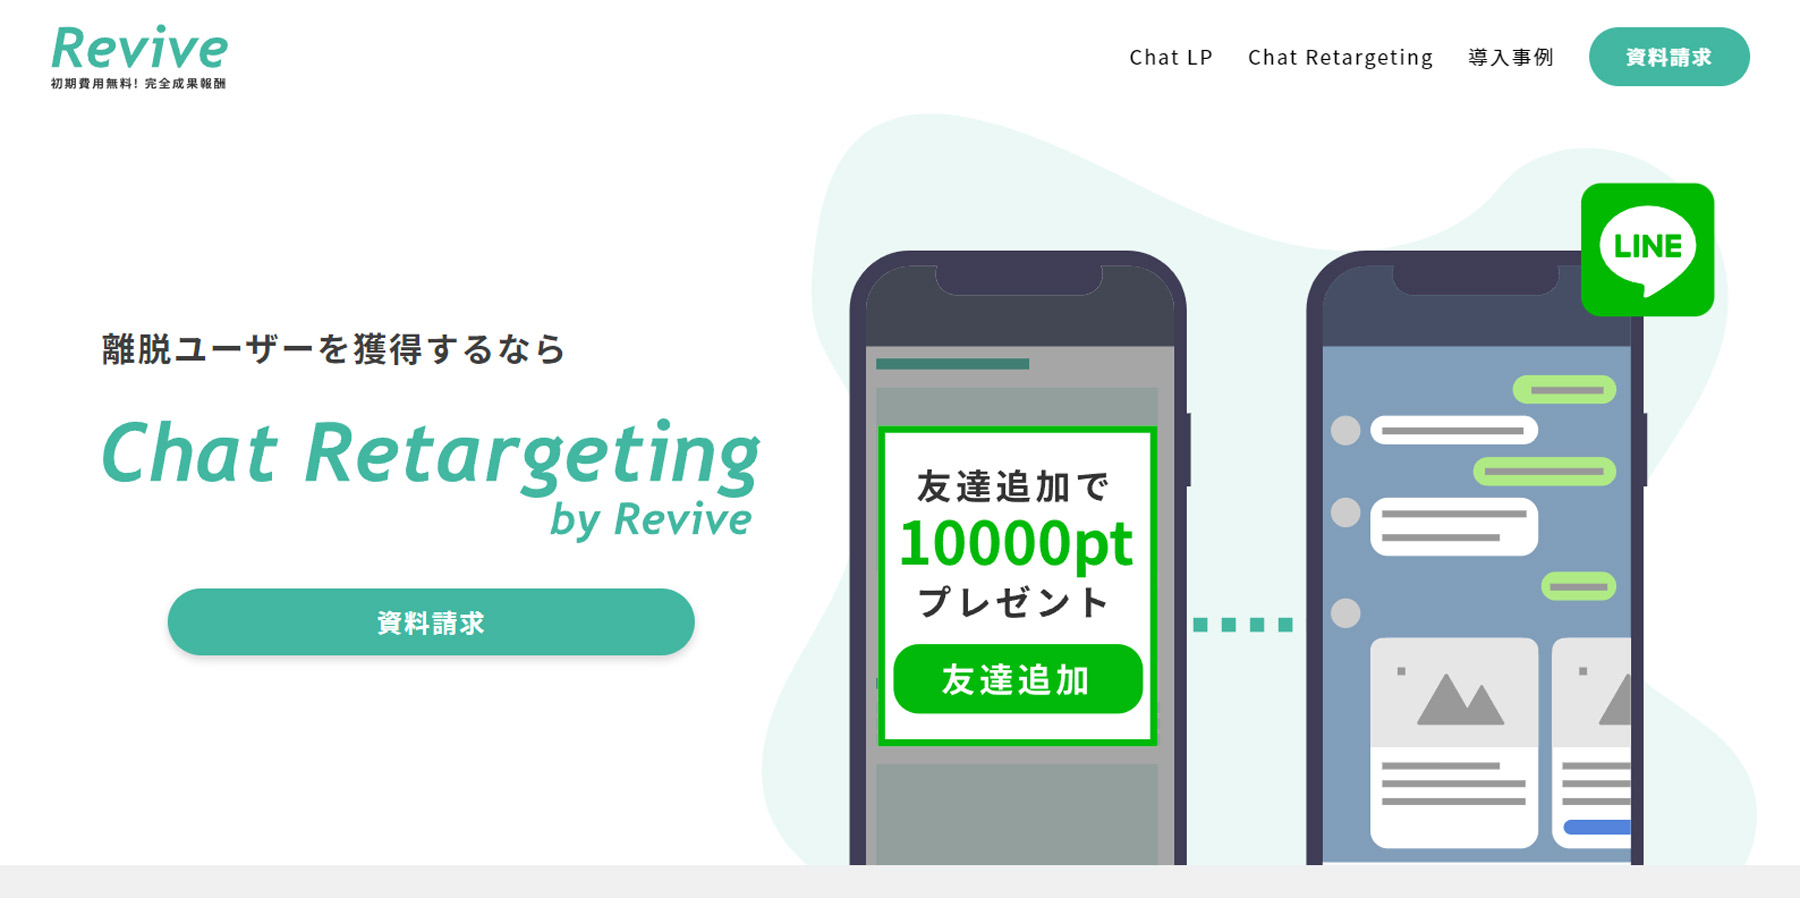 Chat Retargeting by Revive公式Webサイト